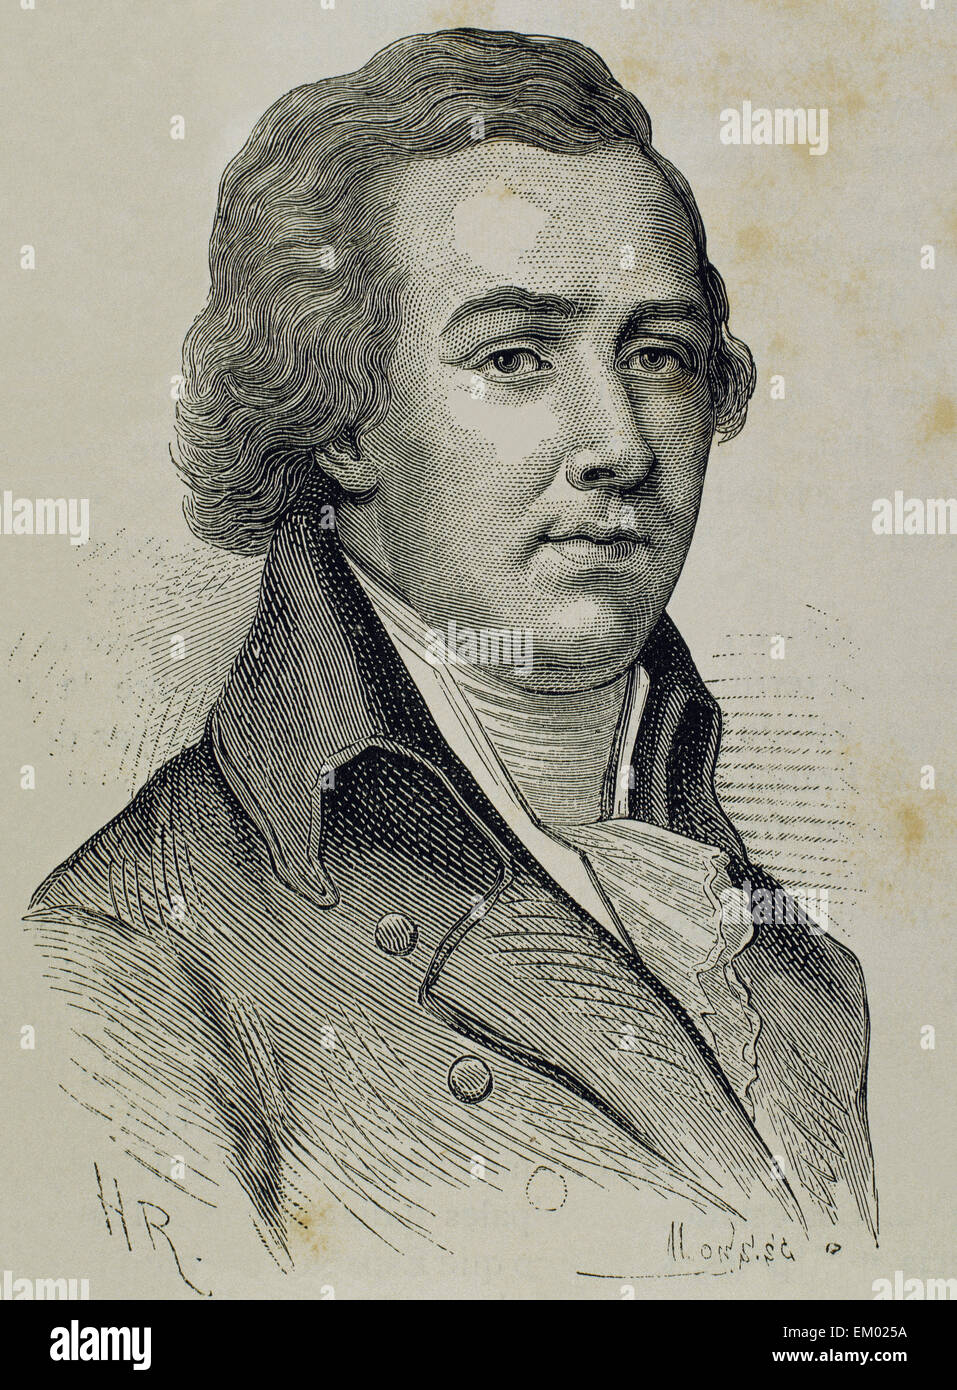 William Pitt, 1st Earl of Chatham (1708-1778). British statesman of the Whig group. Engraving. Portrait. Stock Photo